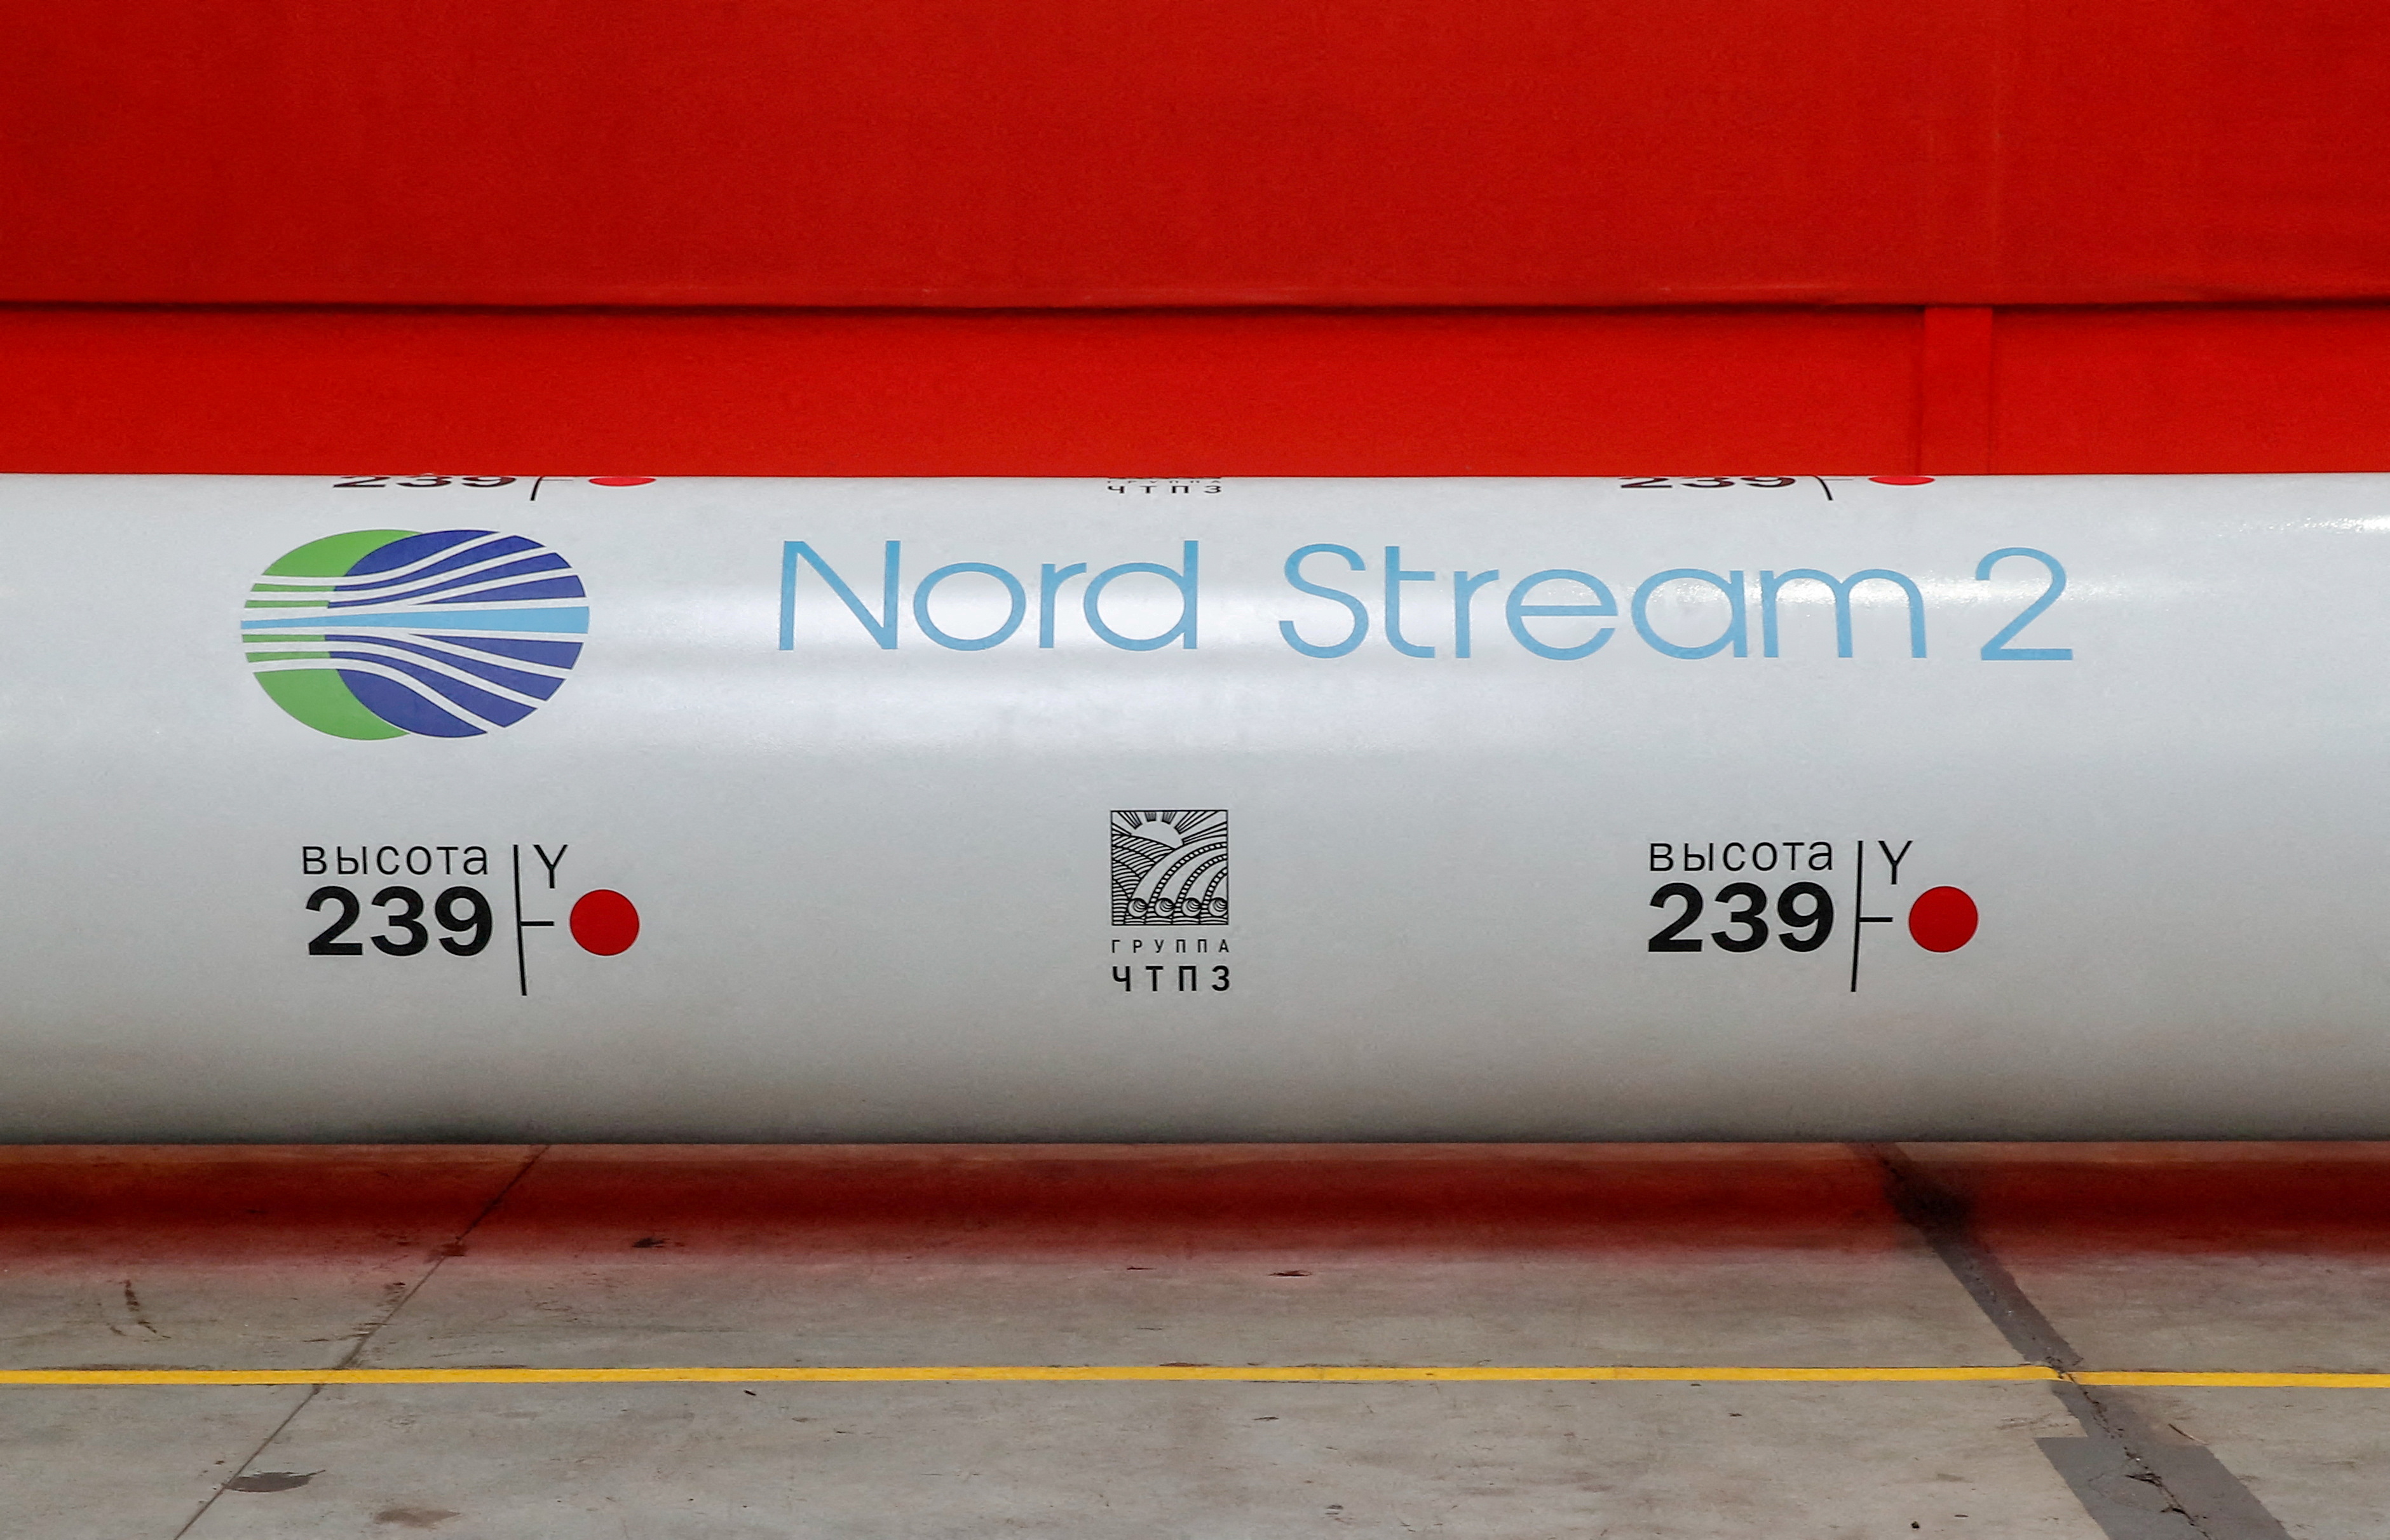 Logo of the Nord Stream 2 gas pipeline project is seen on a large diameter pipe